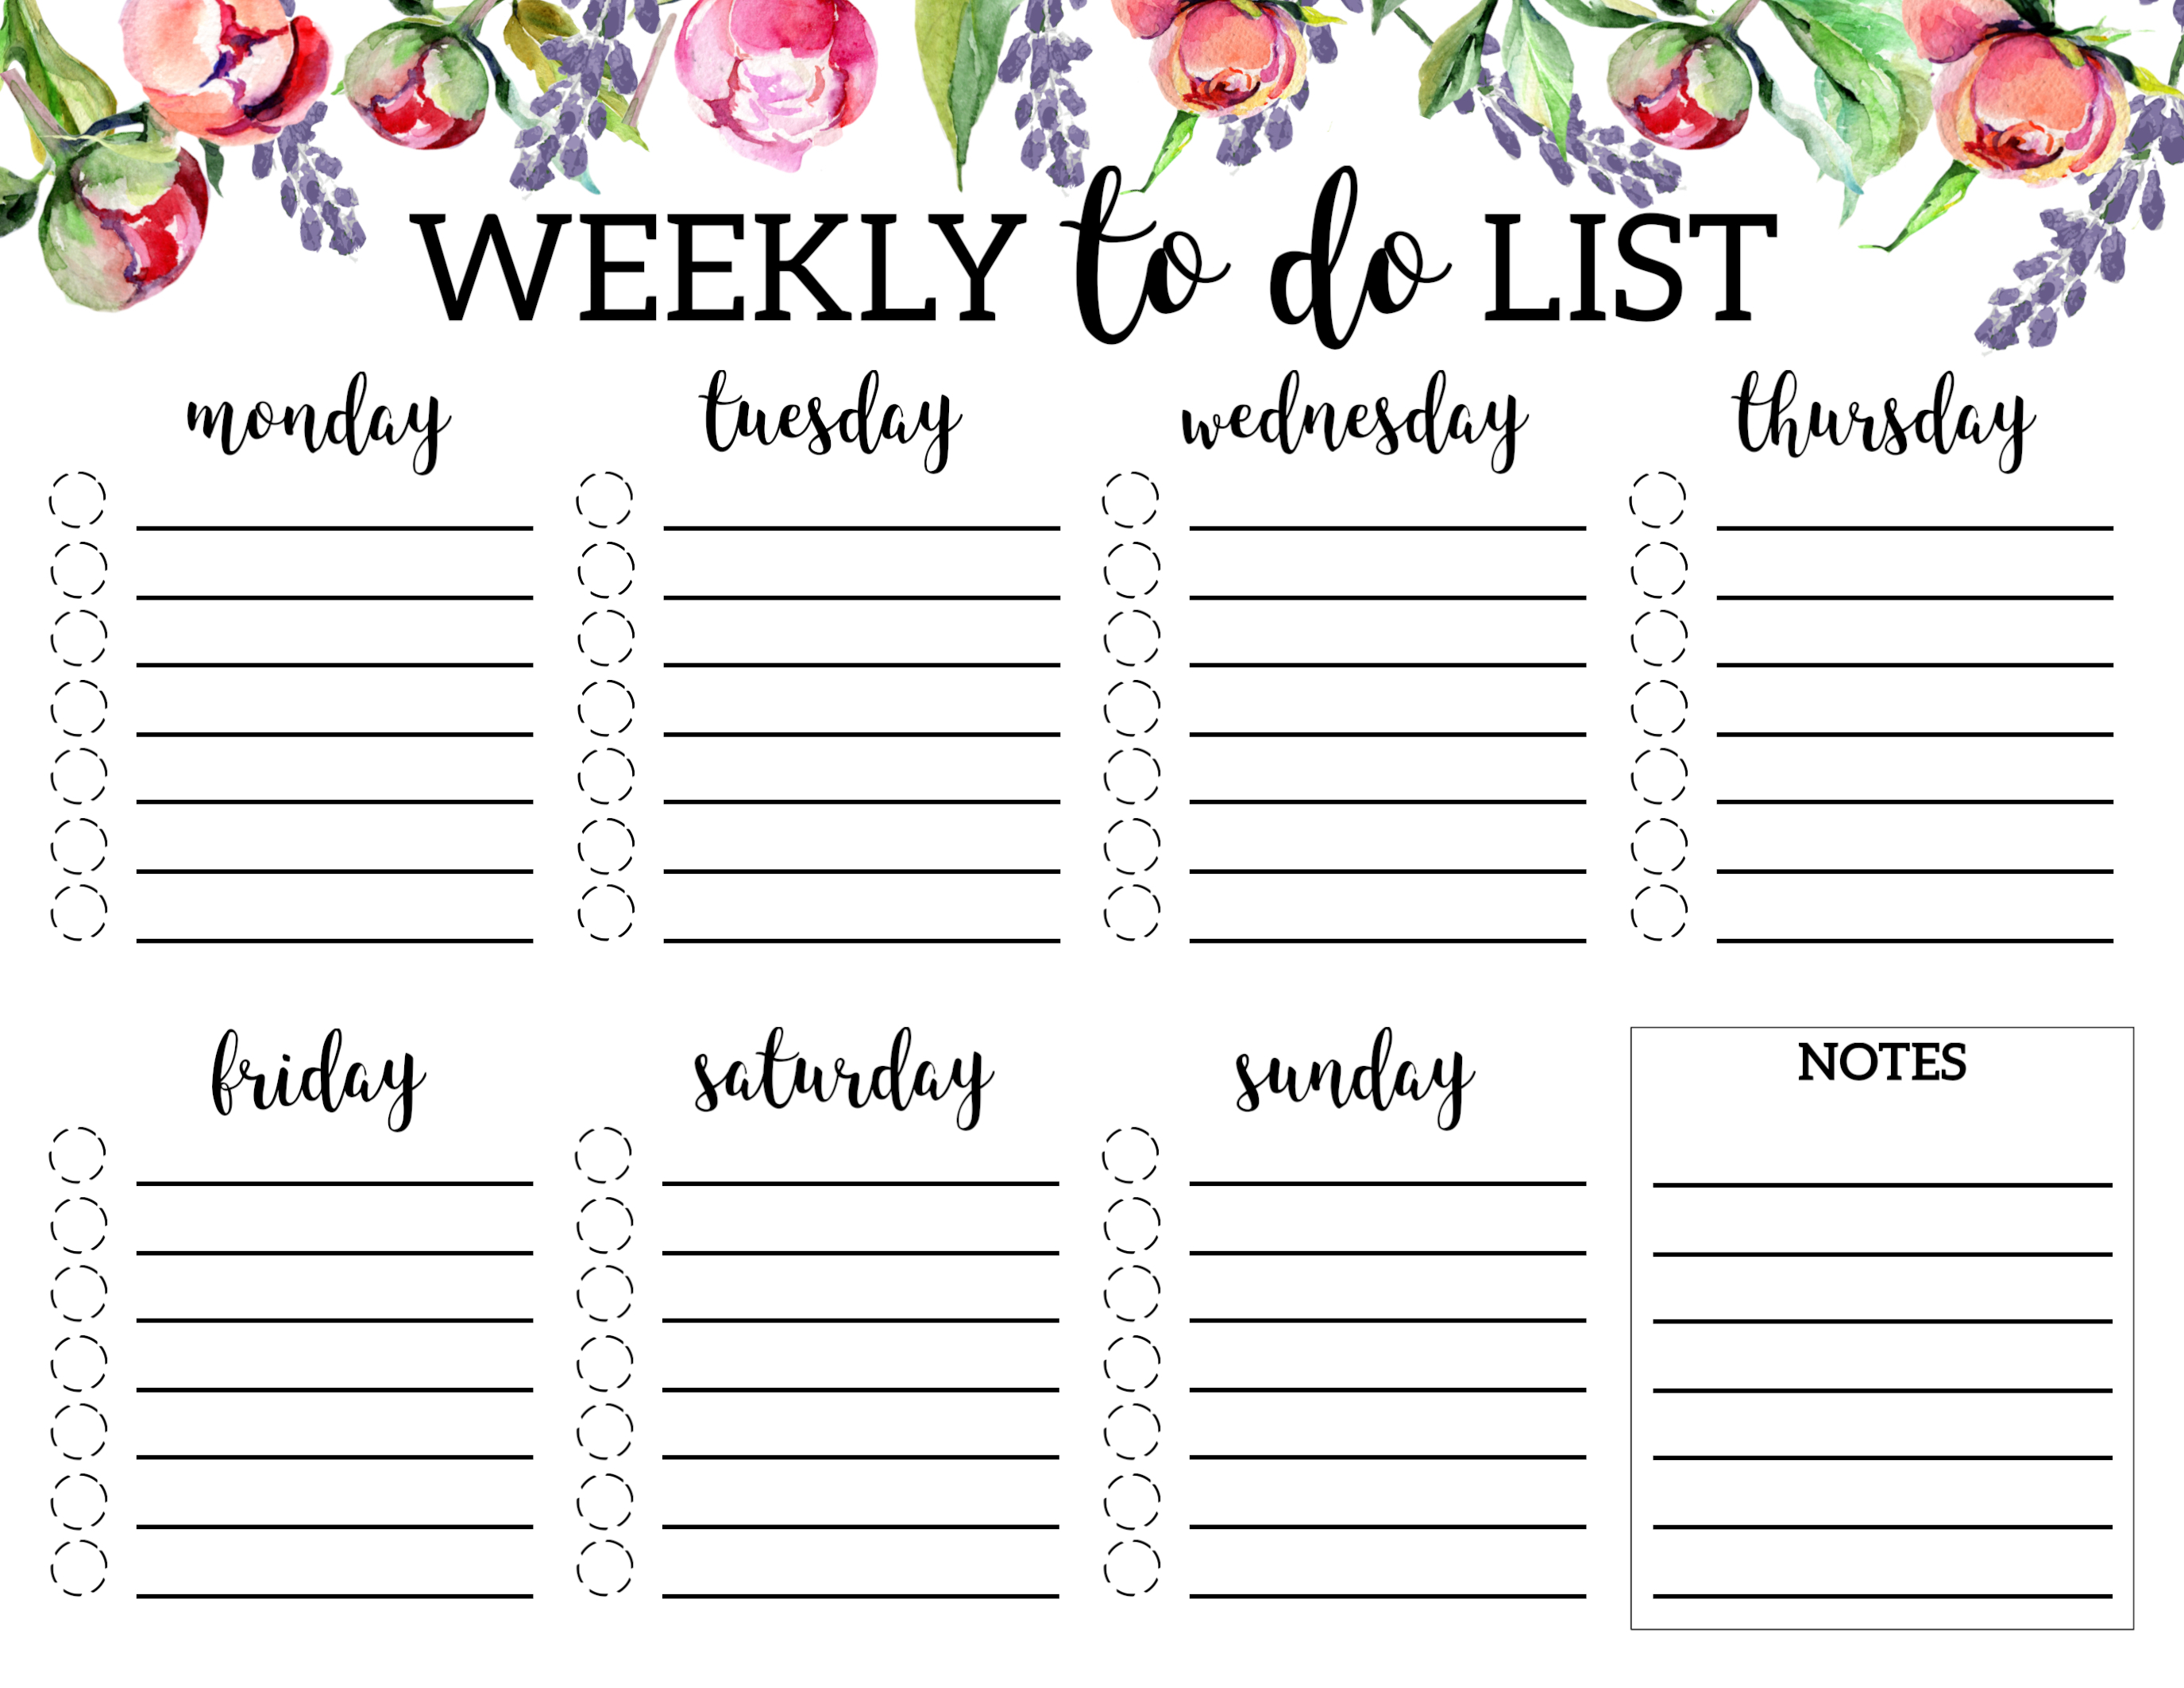 Weekly To Do List Floral 